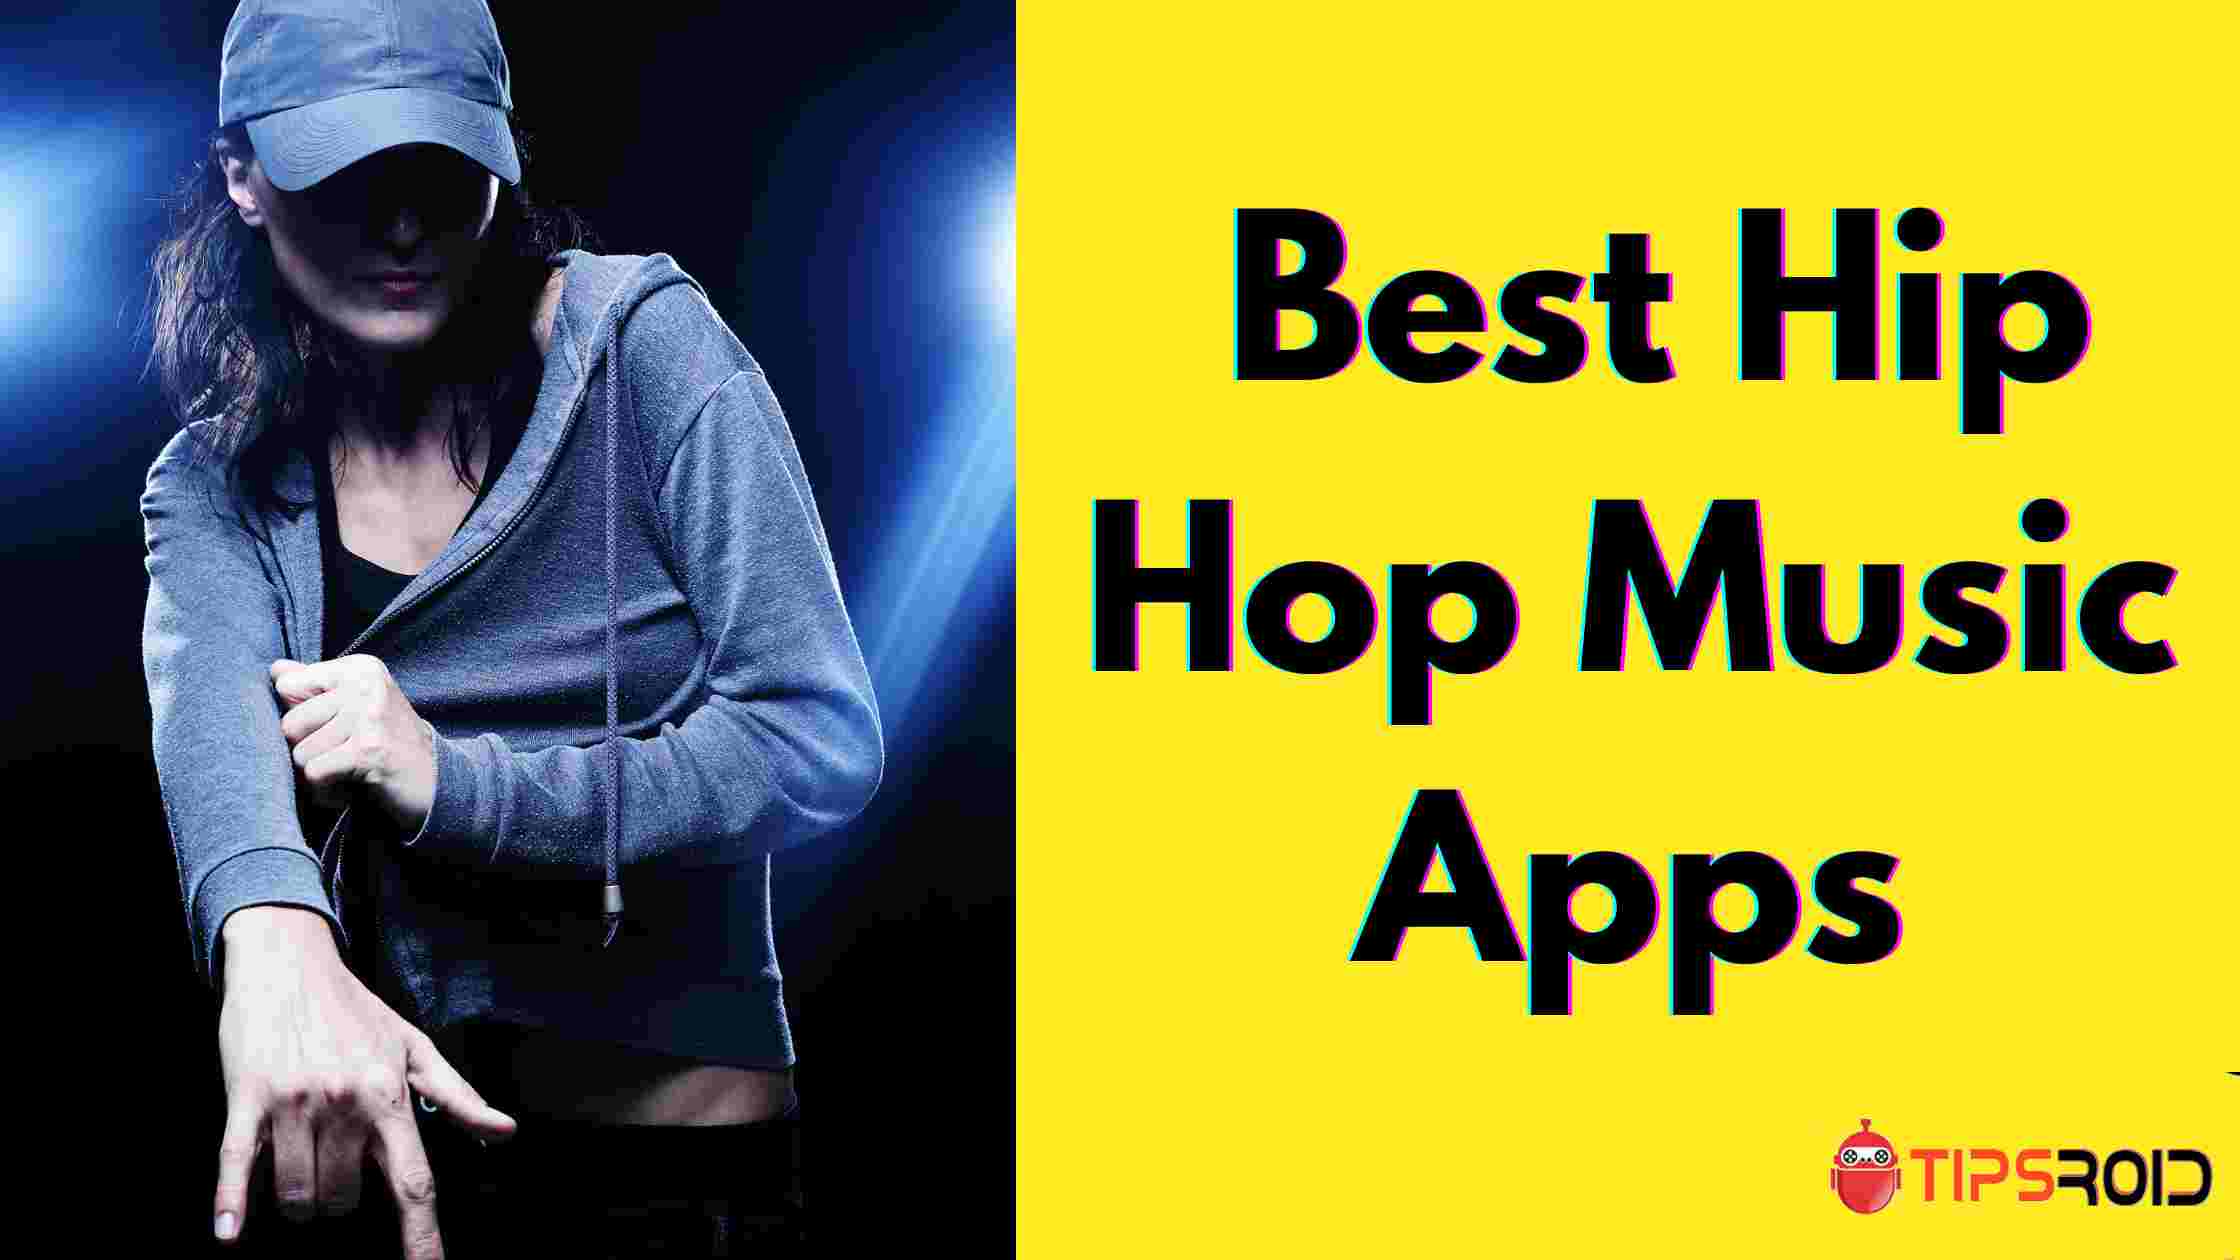 10 Best Hip Hop Music Apps for Android & iPhone